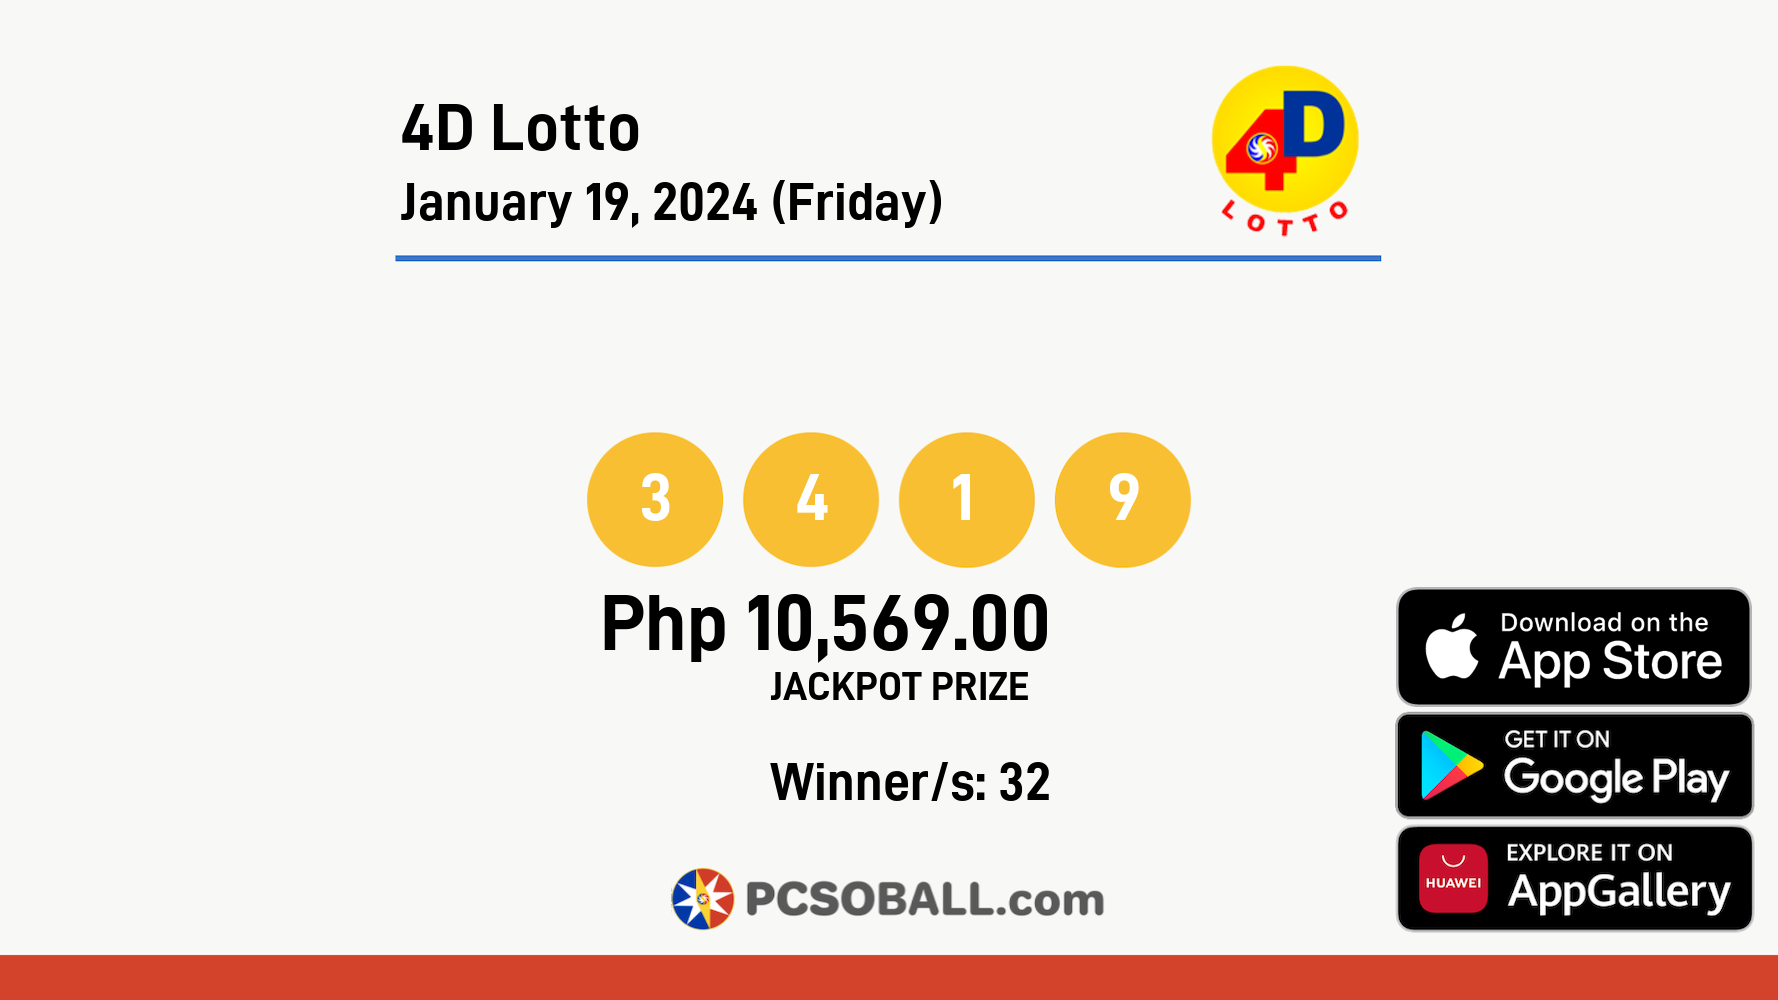 4D Lotto January 19, 2024 (Friday) Result